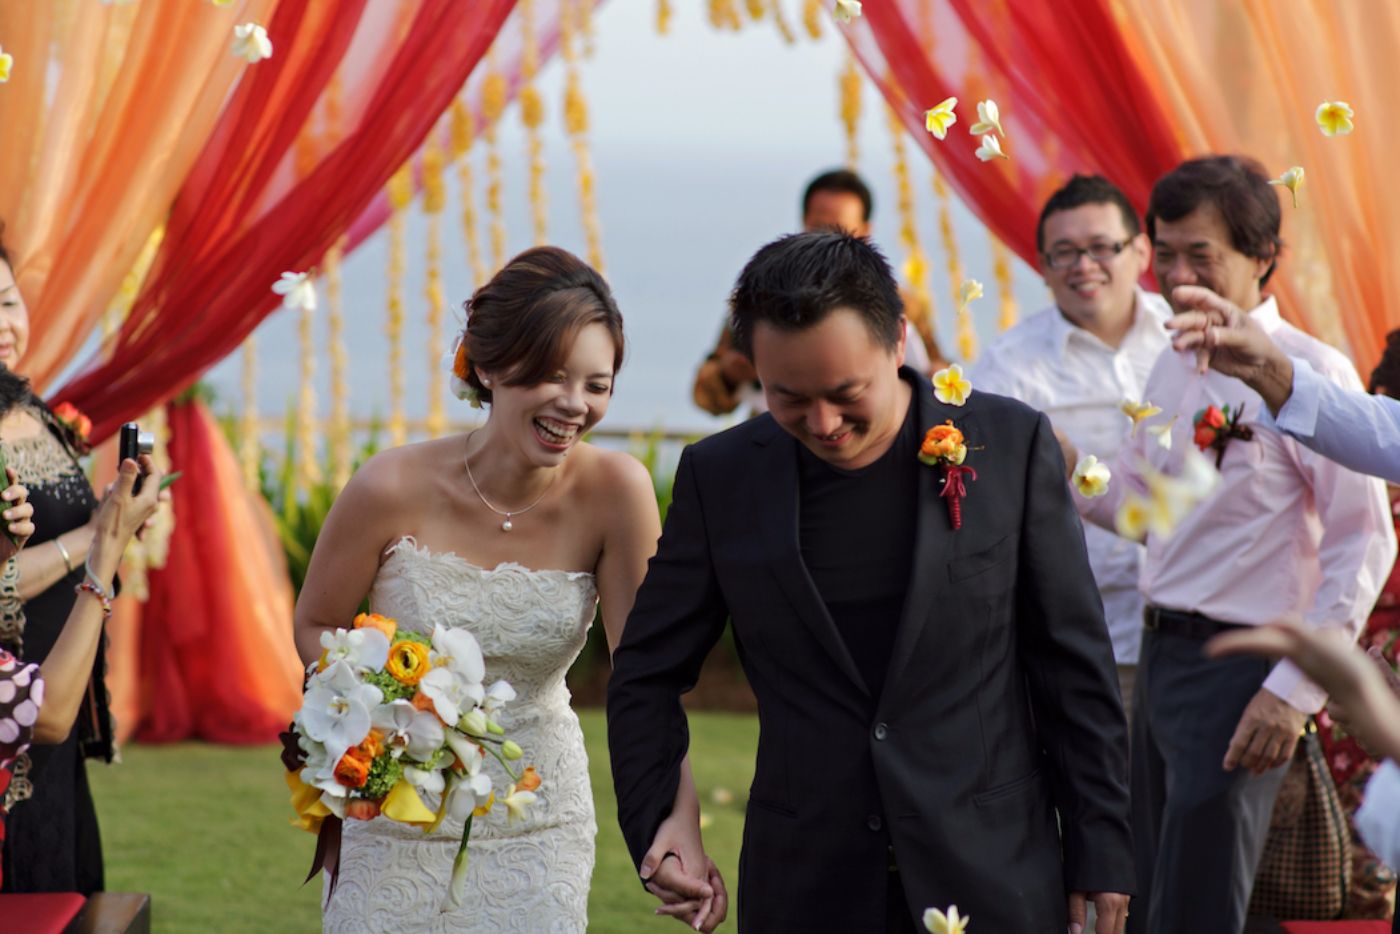 couple walking down aisle as guest showering them with frangipani